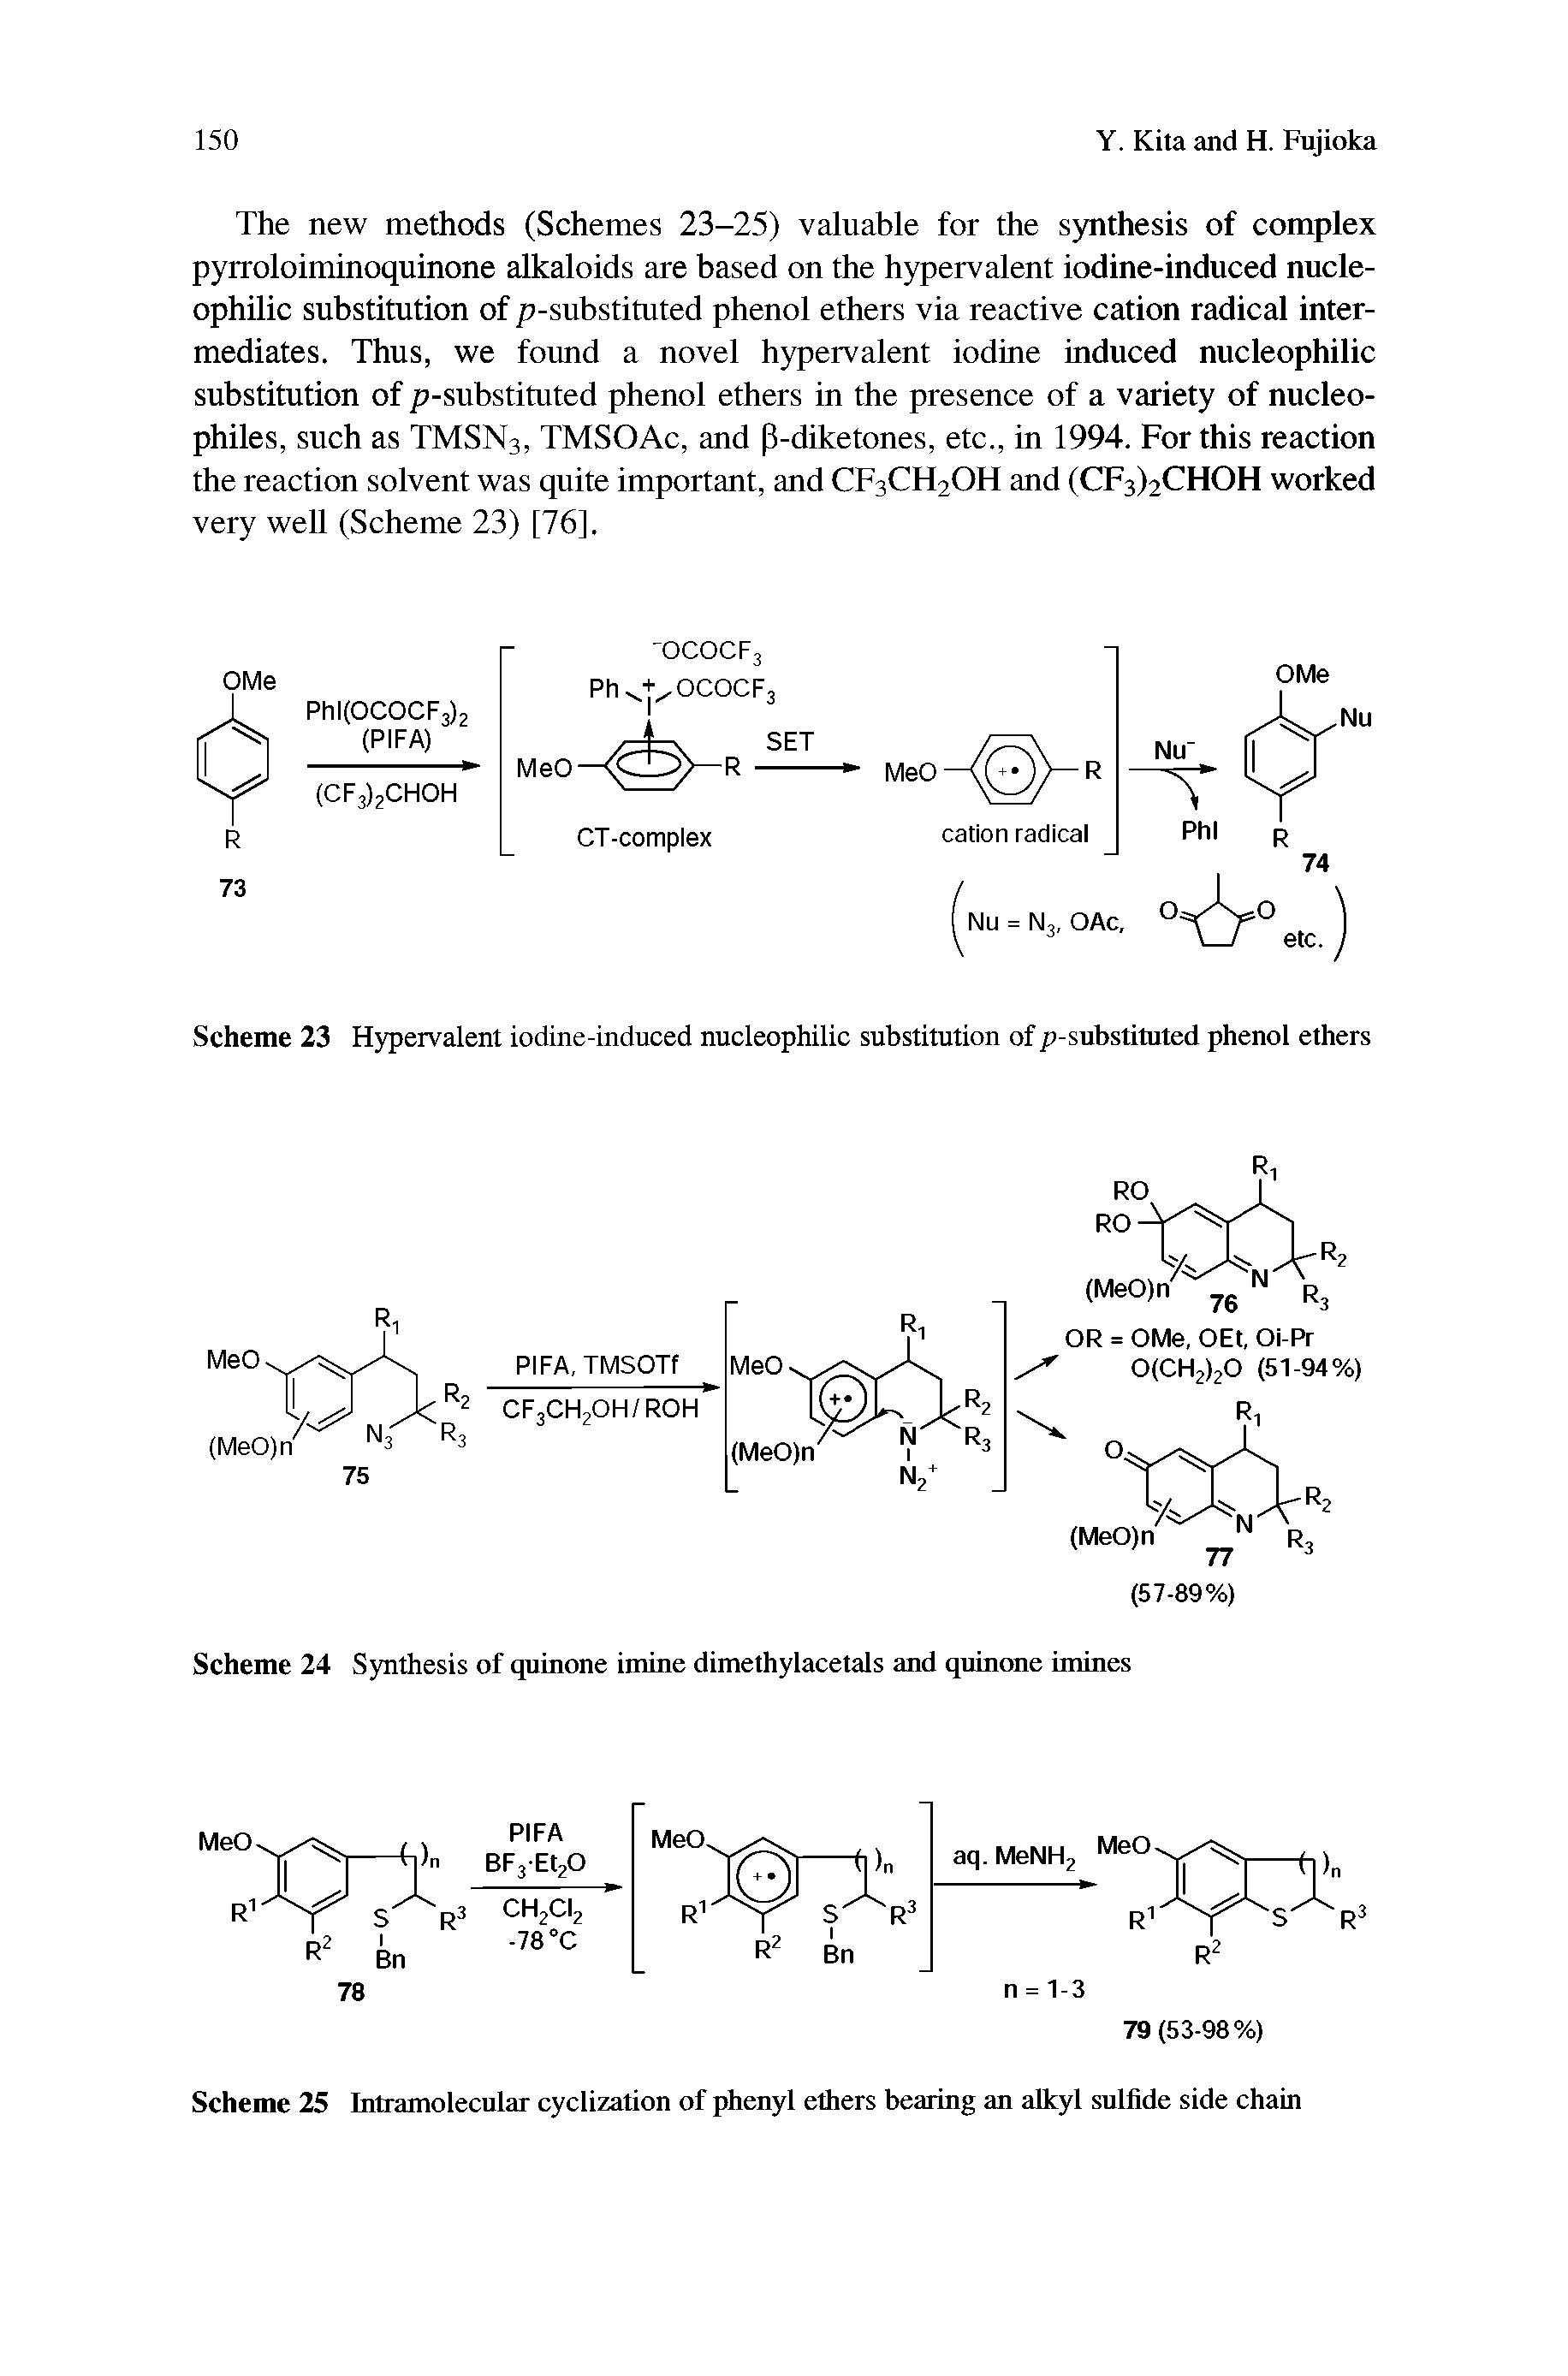 Scheme 24 Synthesis of quinone imine dimethylacetals and quinone imines...